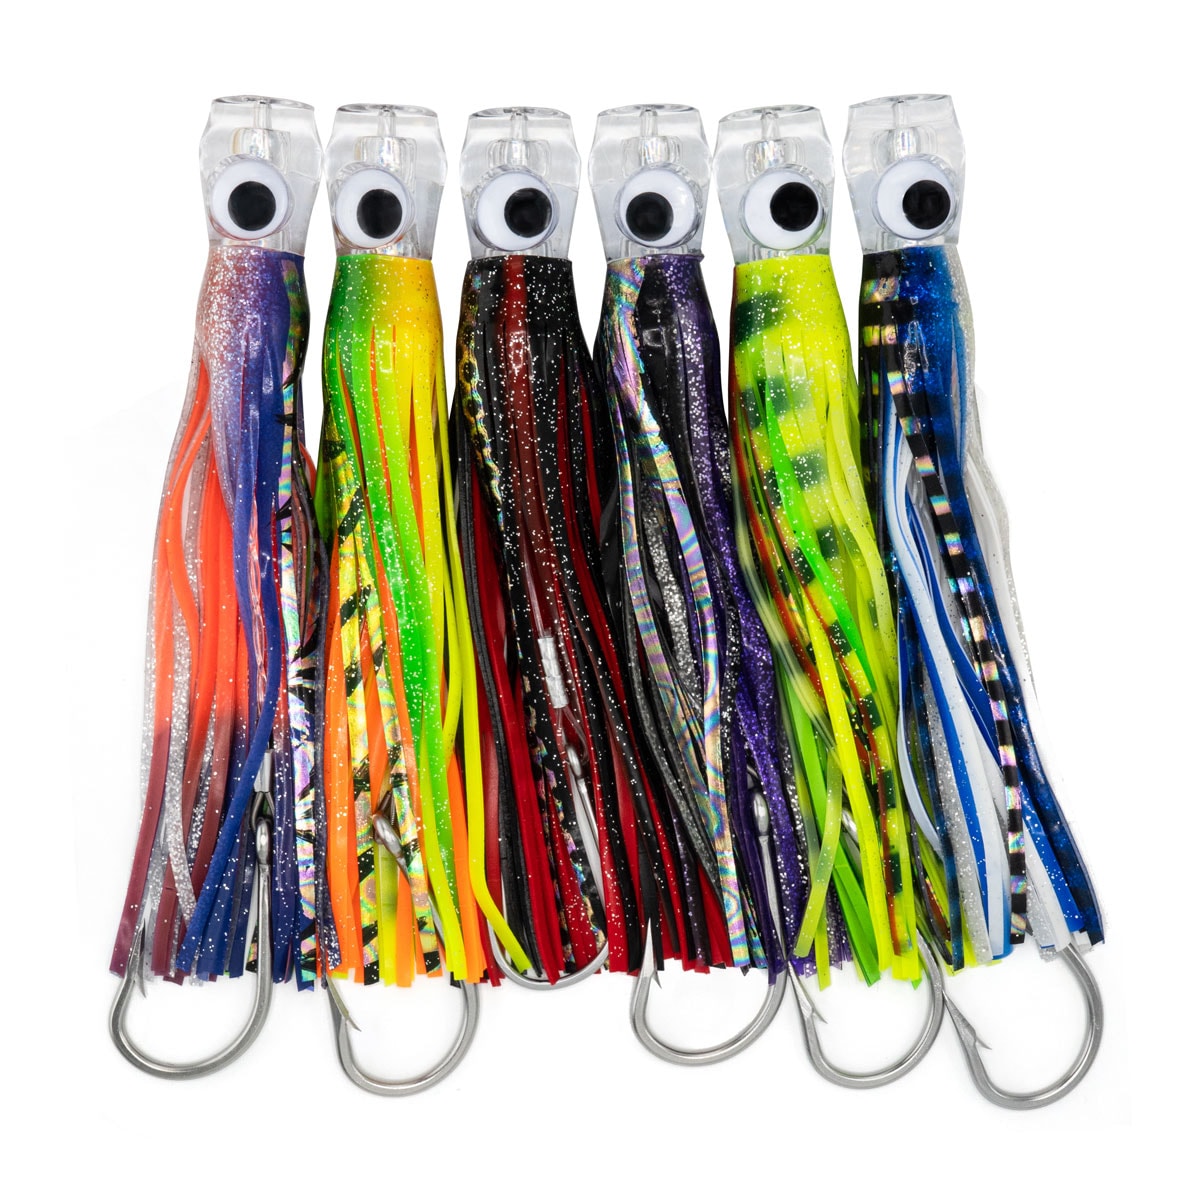 Rite Angler 9 Chugger Head Trolling Lures Set of 6 Teasers in Carrying Case for Saltwater Offshore Big Game Fishing